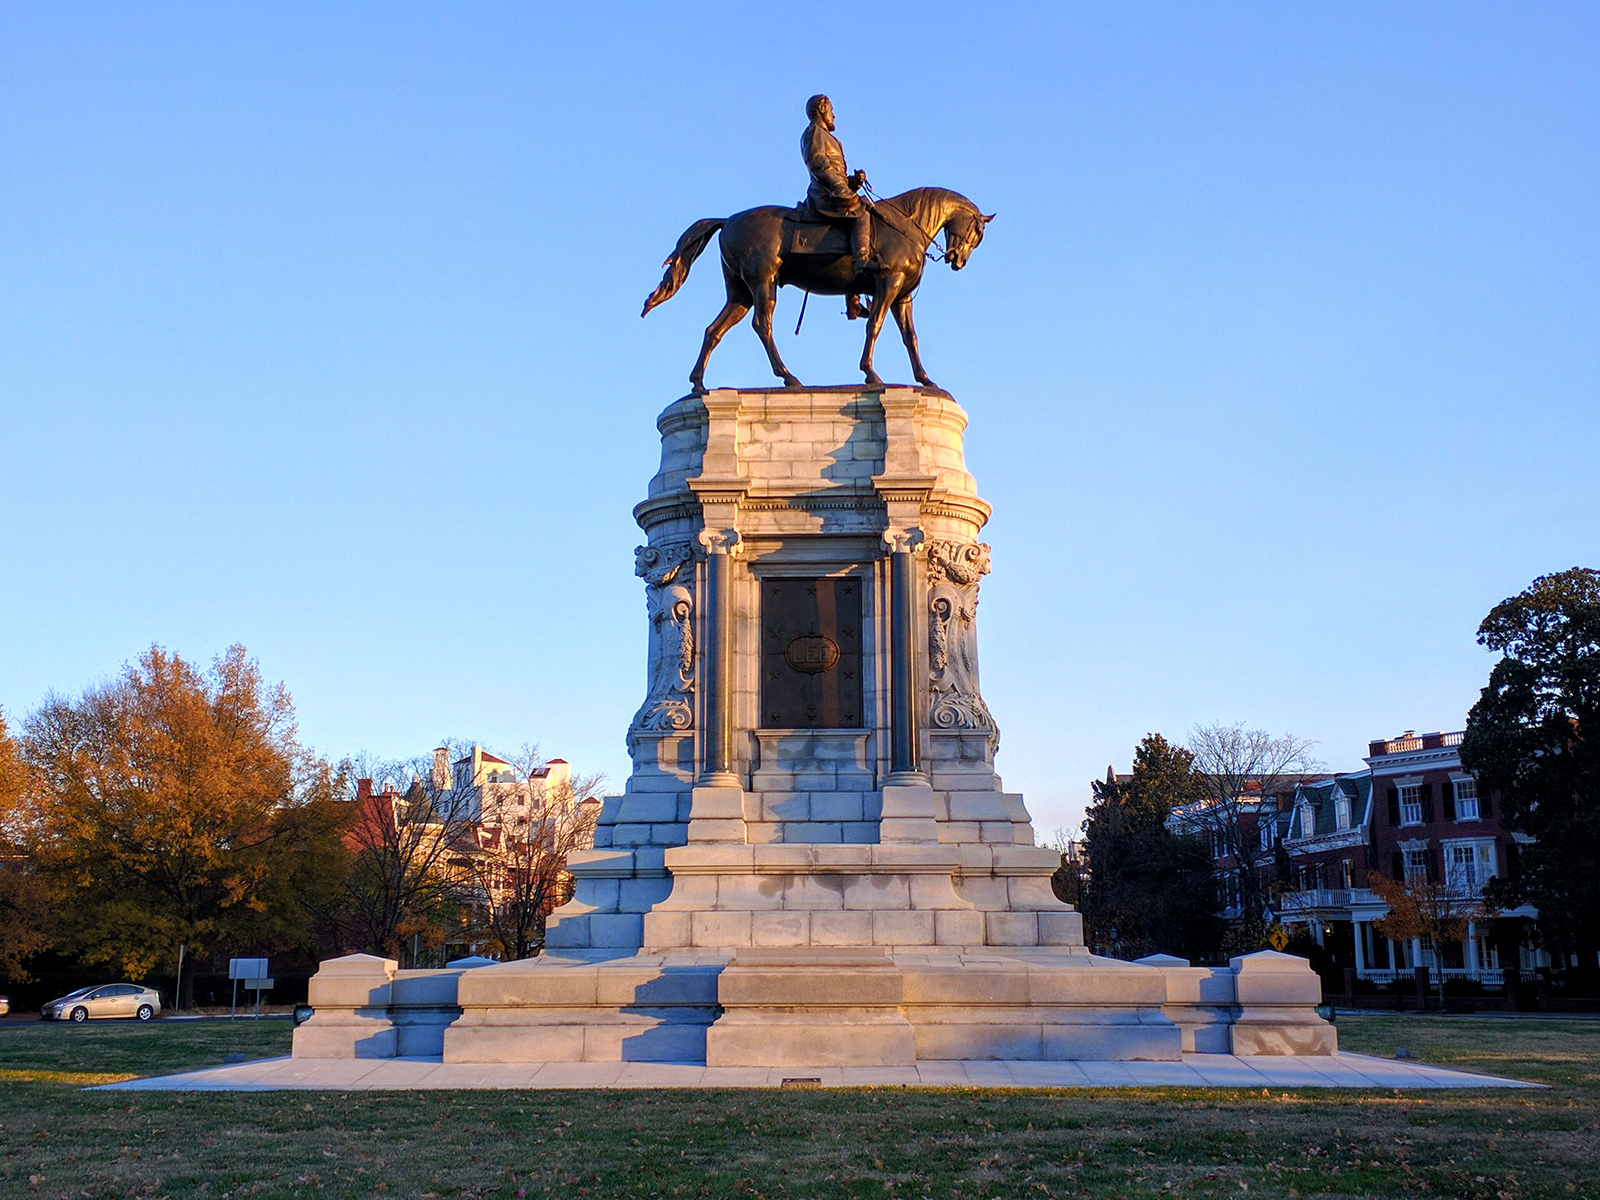  The monument of General Robert E. Lee in Richmond, Virginia.